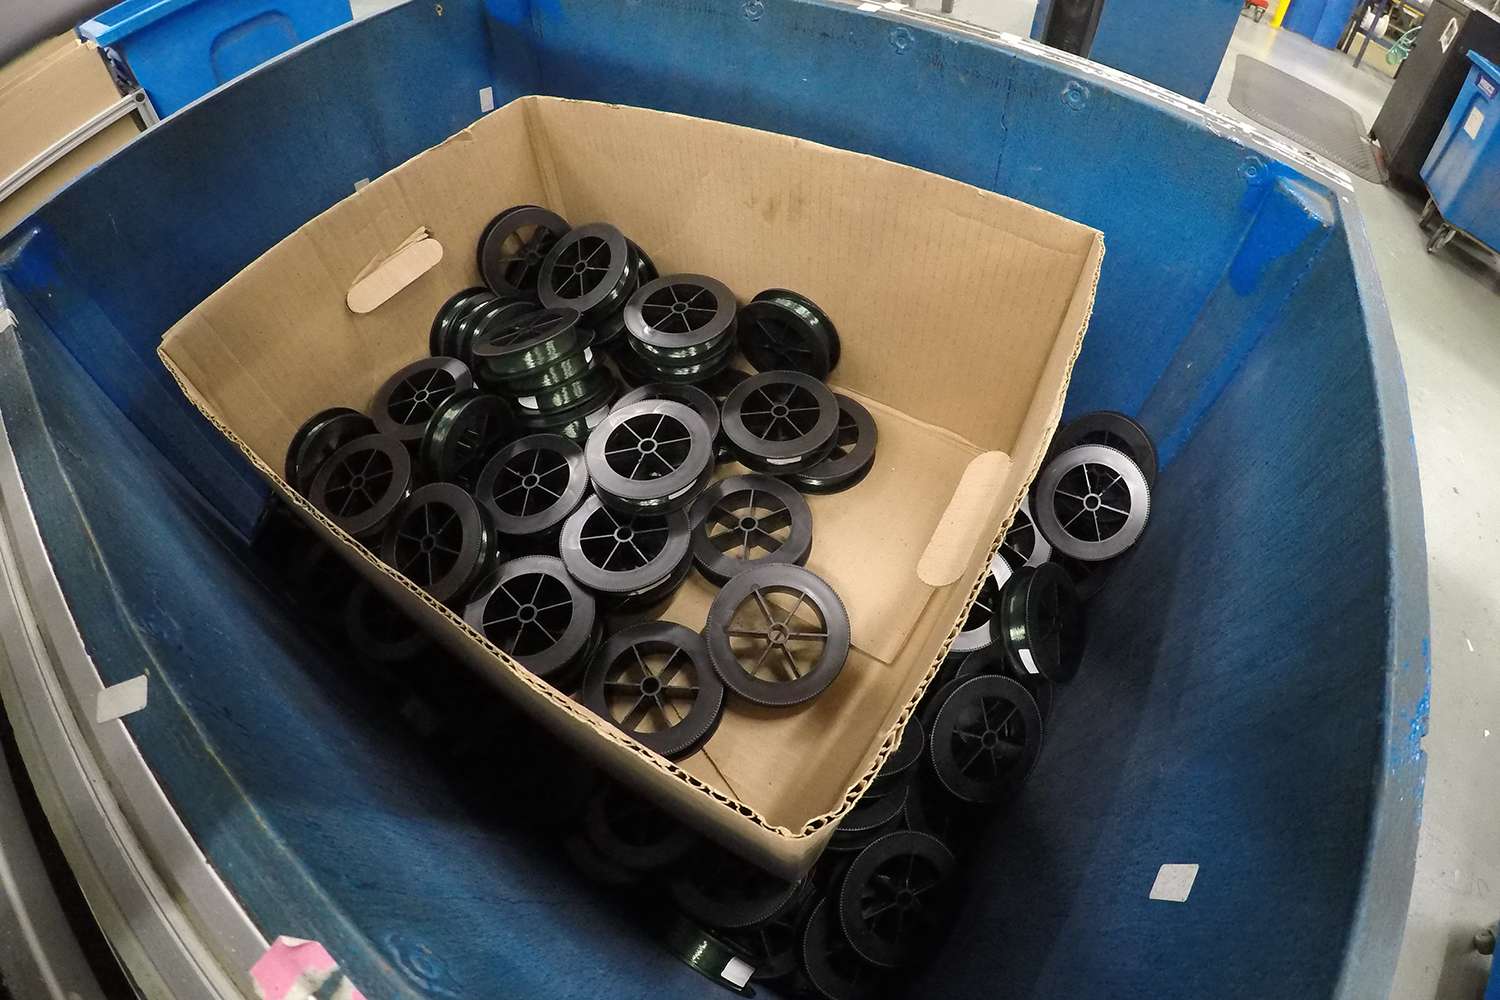 Here the loaded spools are awaiting packaging materials. 